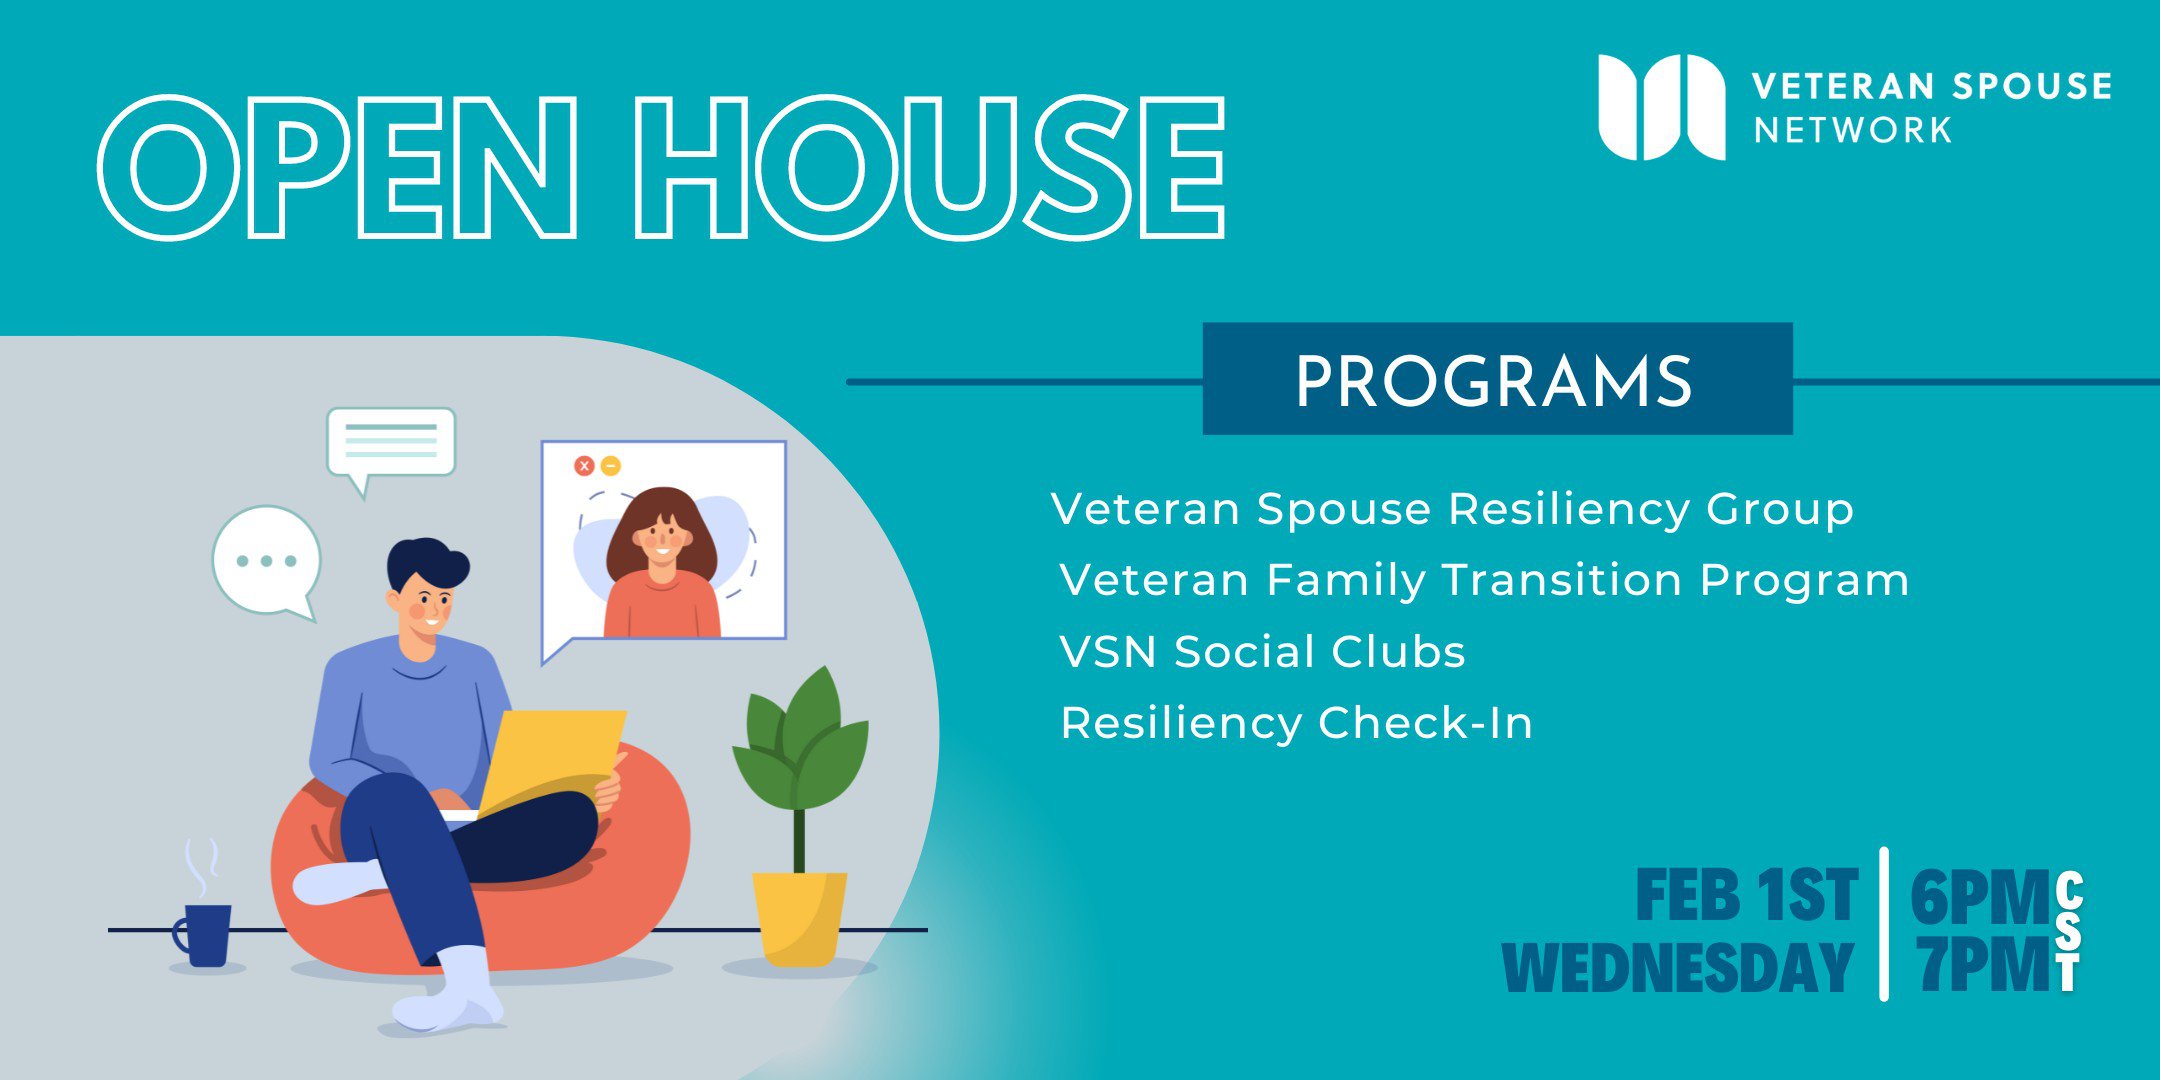 Veteran Spouse Network Open House on Feb 1st at 6PM CST